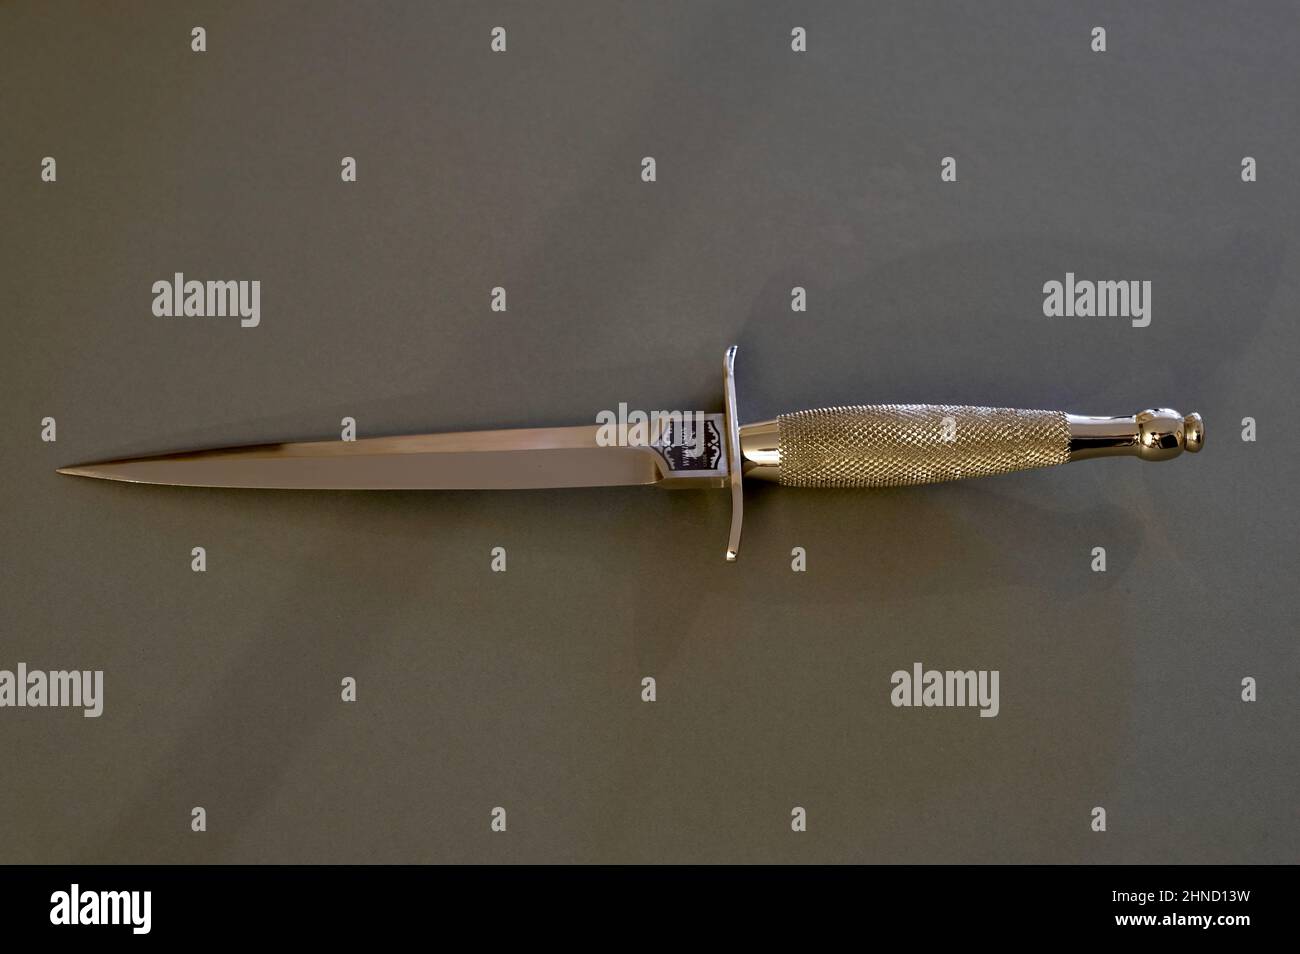 Sykes Fairbairn Commando Dagger Fighting Knife, Mk 1 original with etched ricasso. A very rare Wilkinson Sword, Primer Part 1 knife 3' Cross Guard Stock Photo